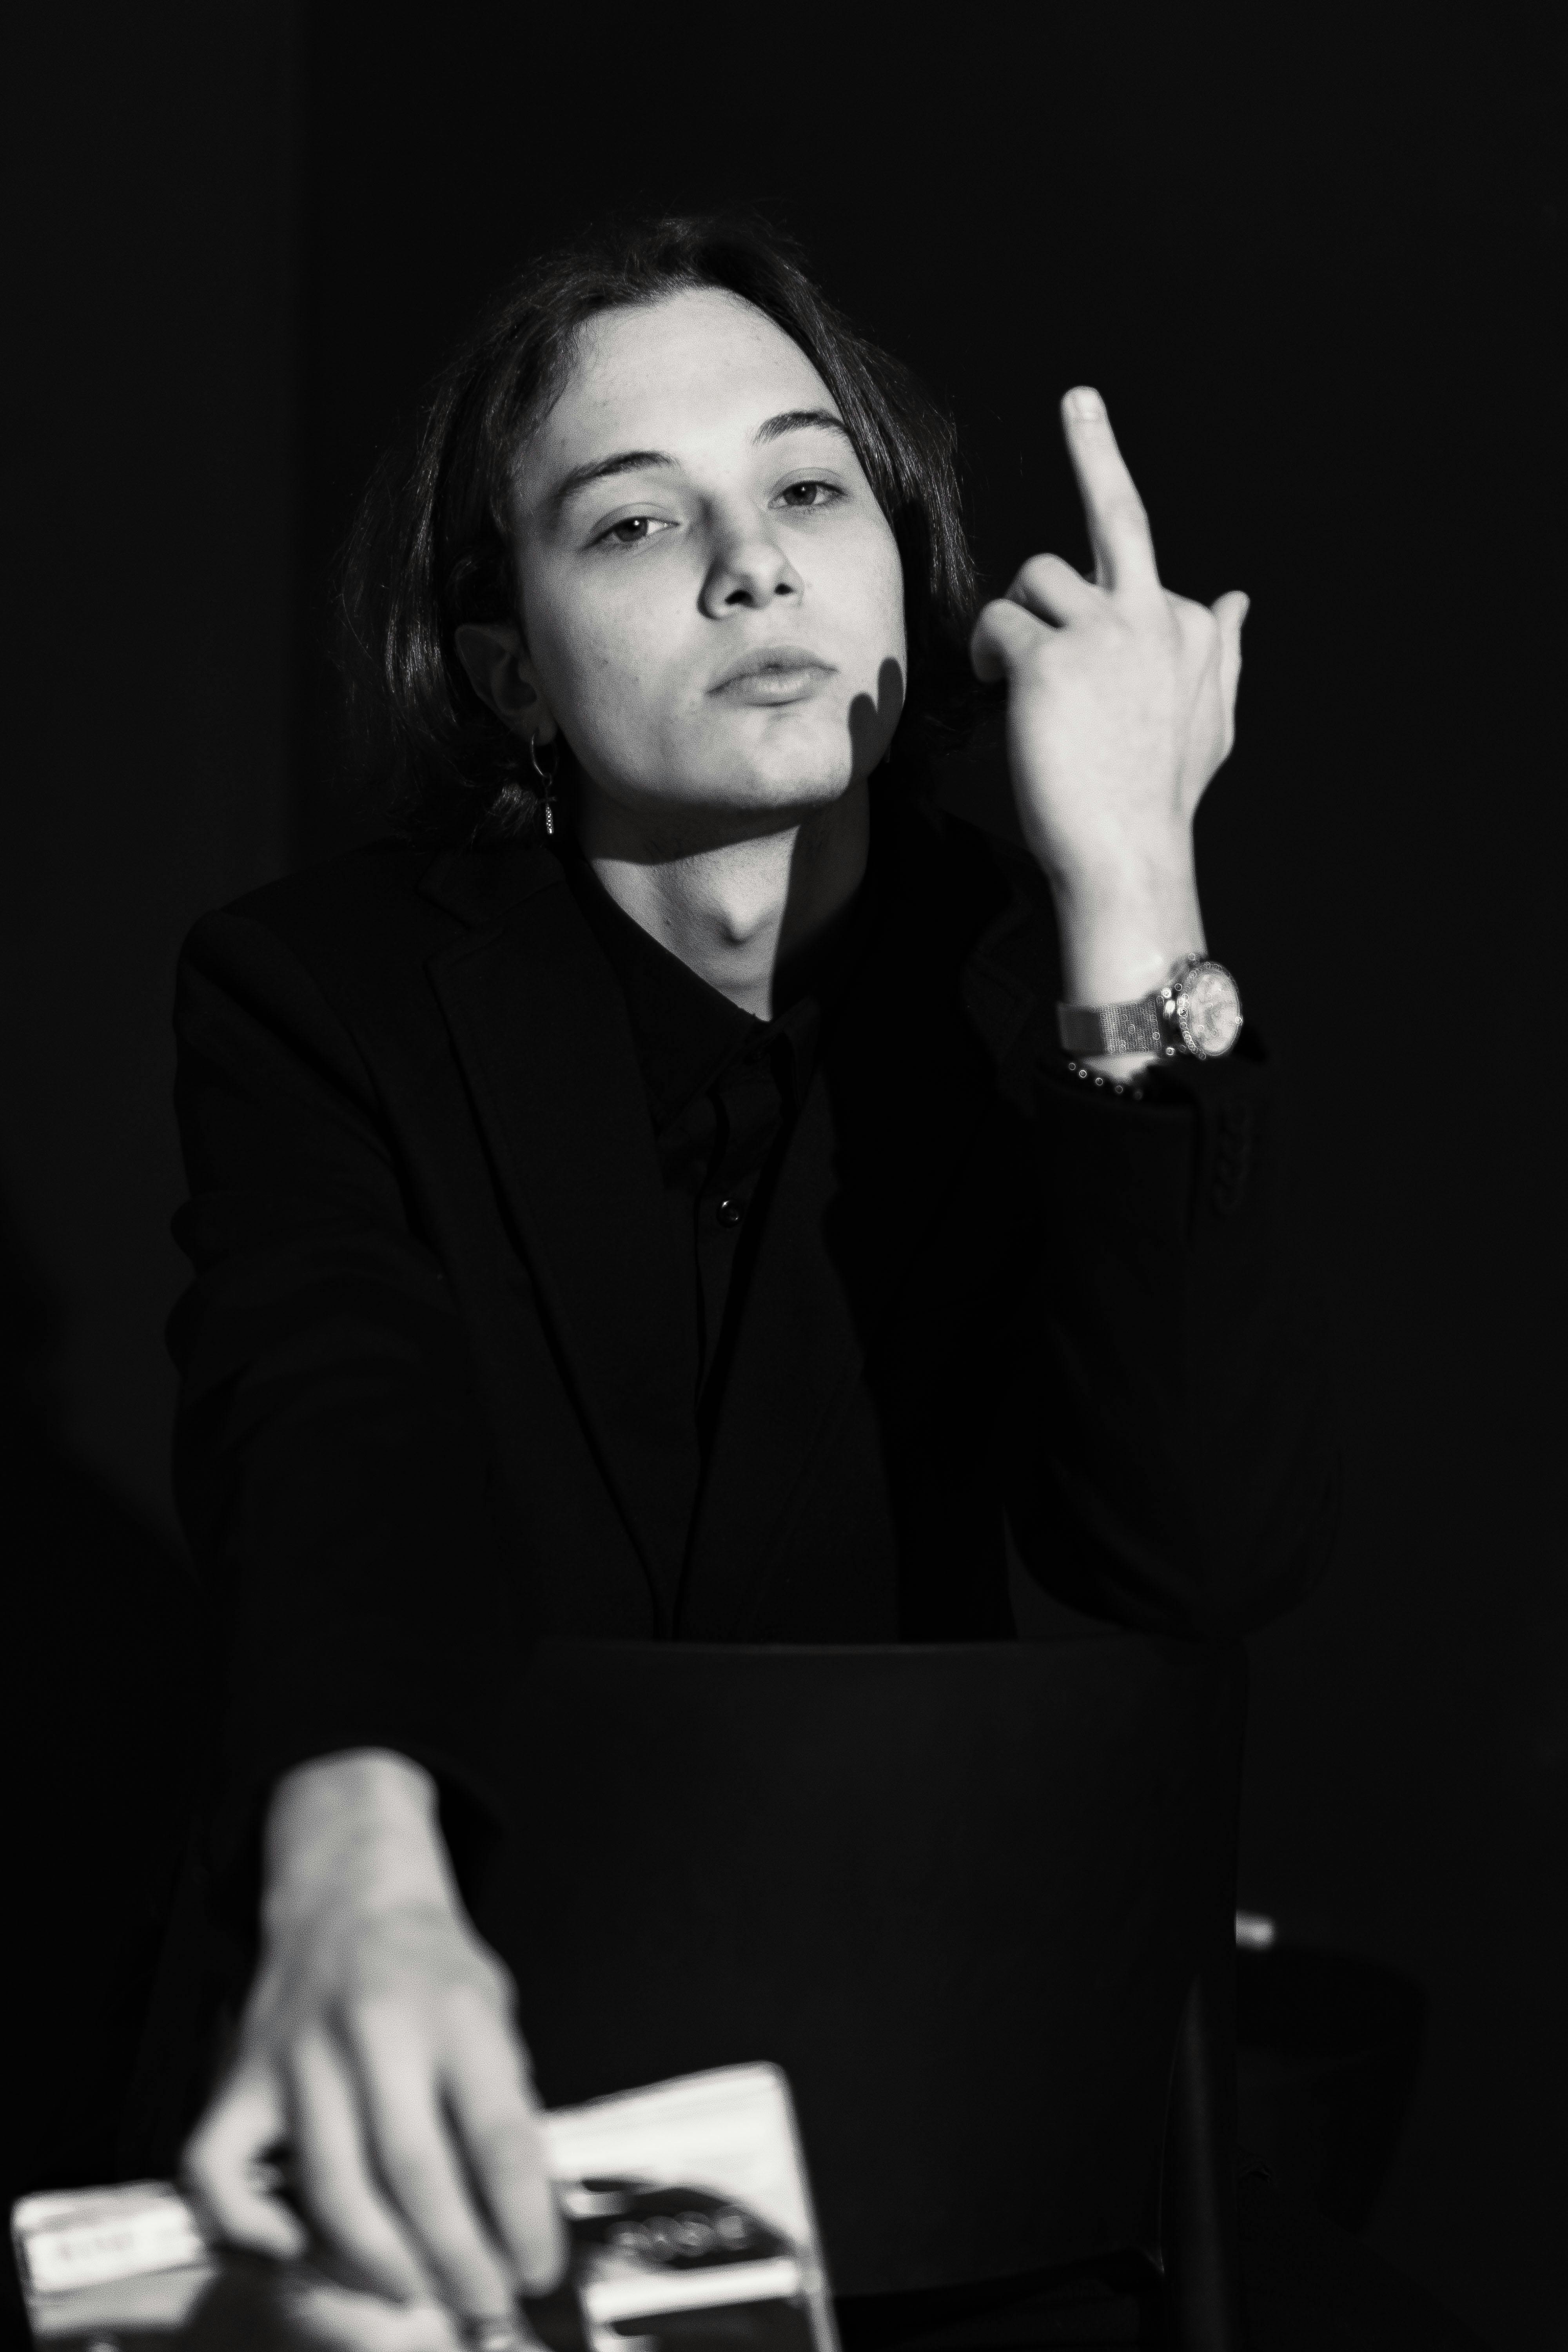 Brunette Woman Showing Middle Finger · Free Stock Photo